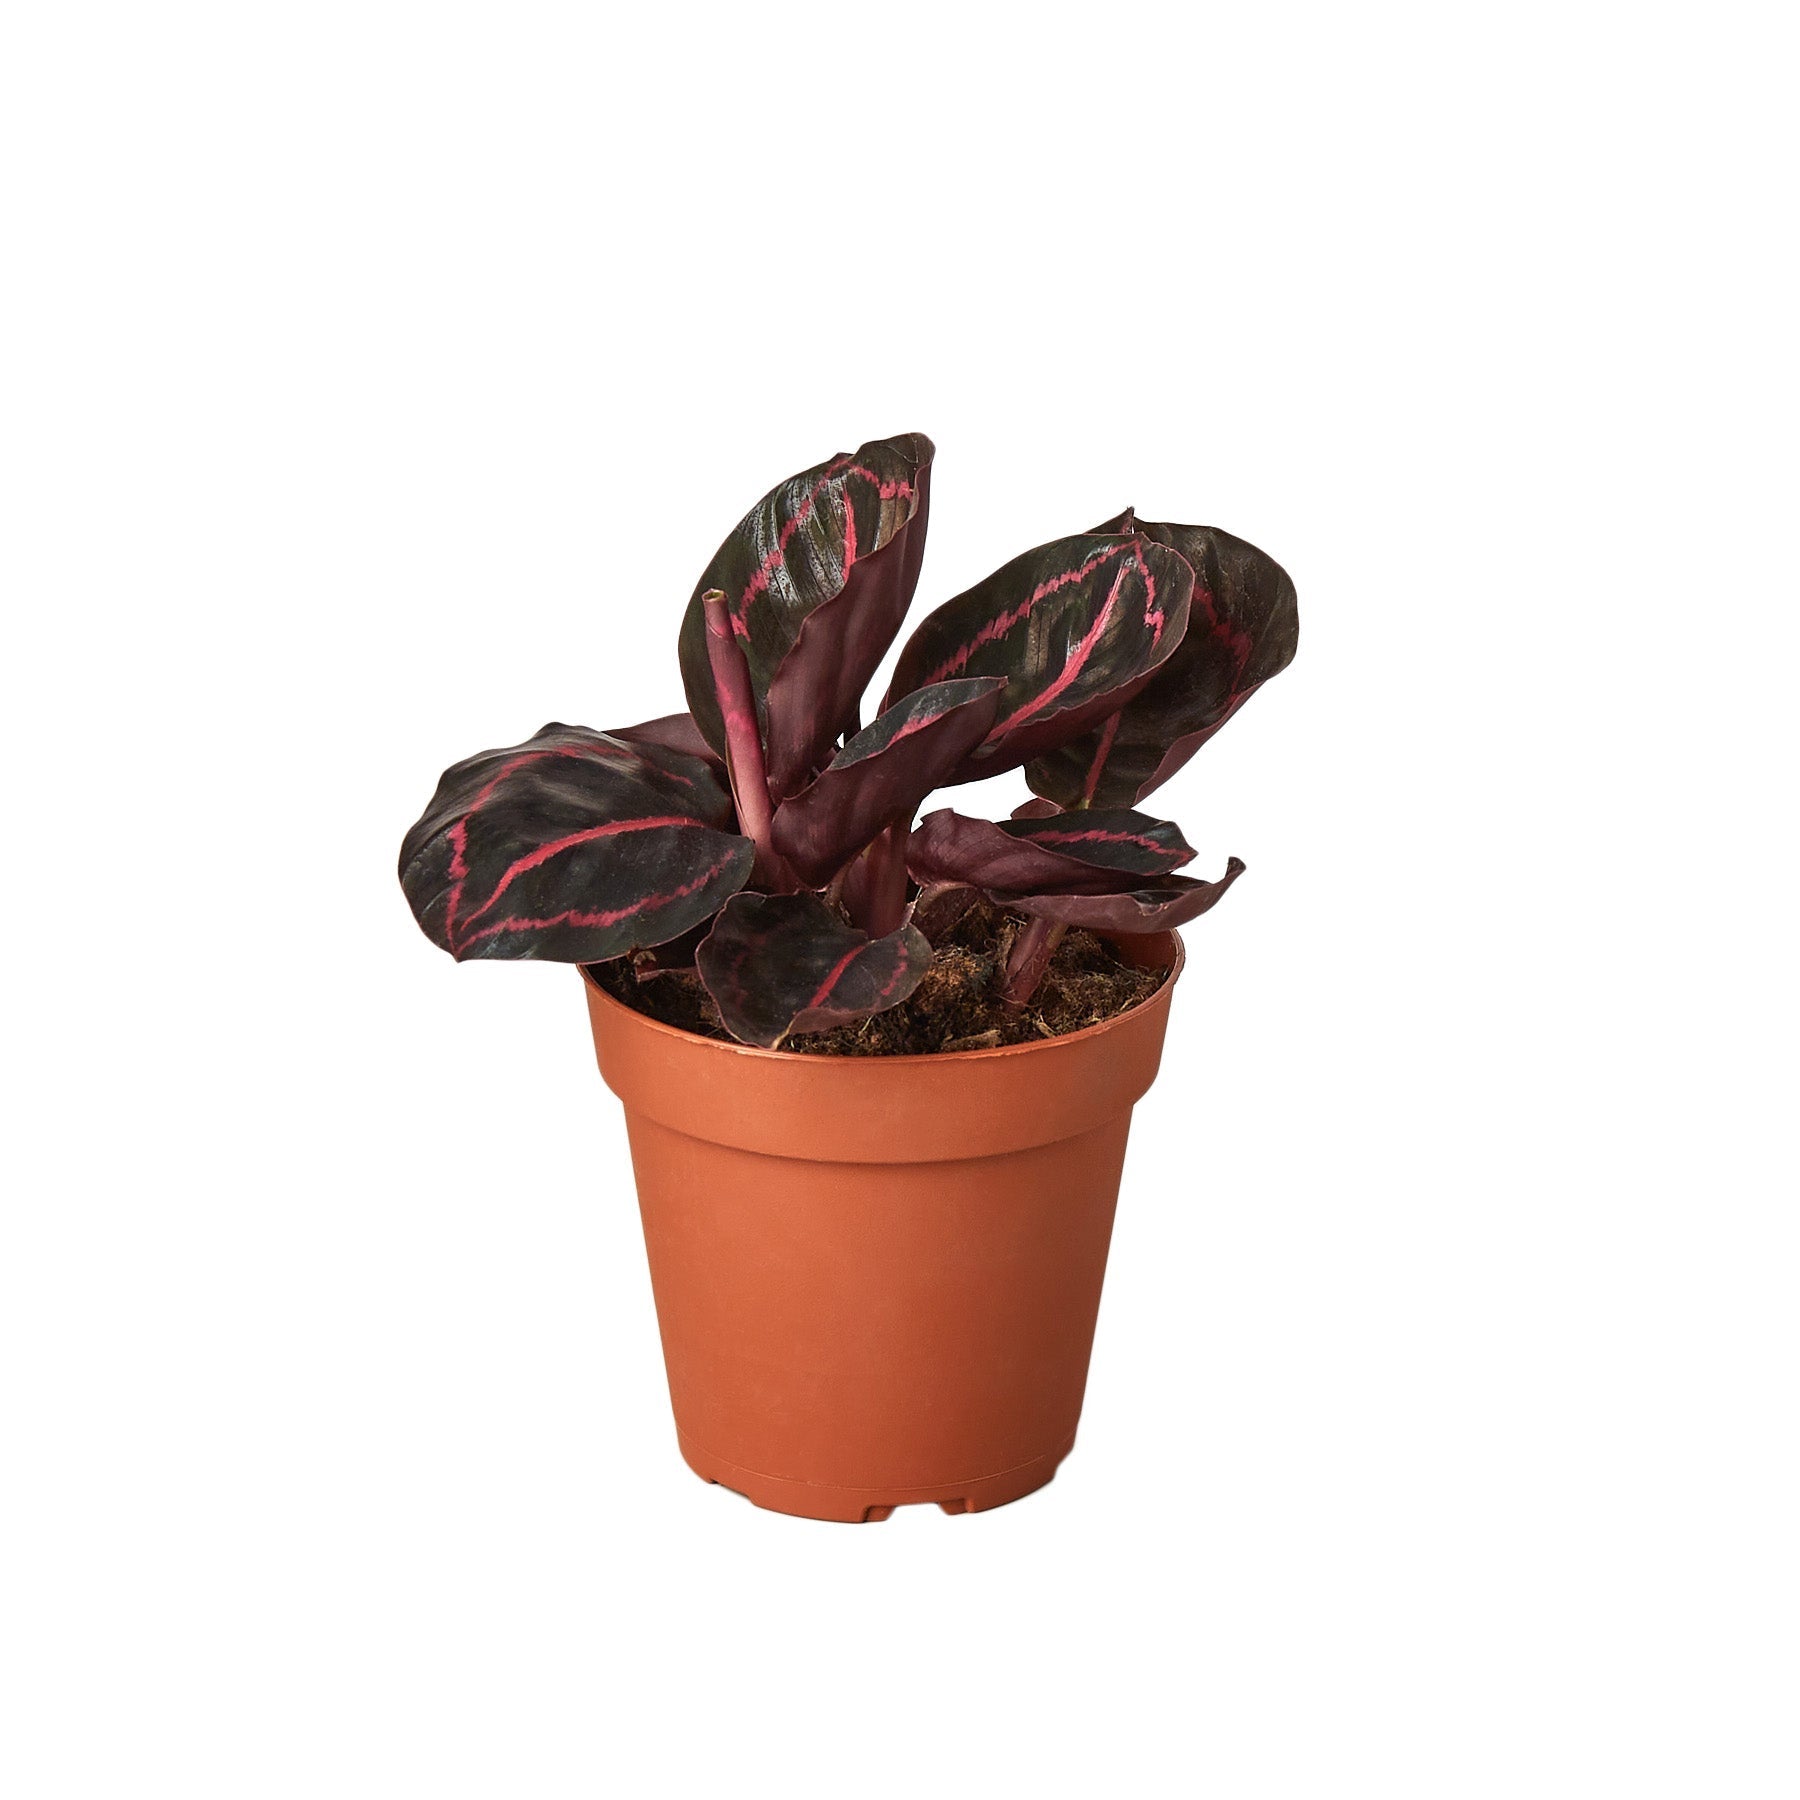 A small potted plant with vibrant red and dark black leaves, available at the best garden center near me.